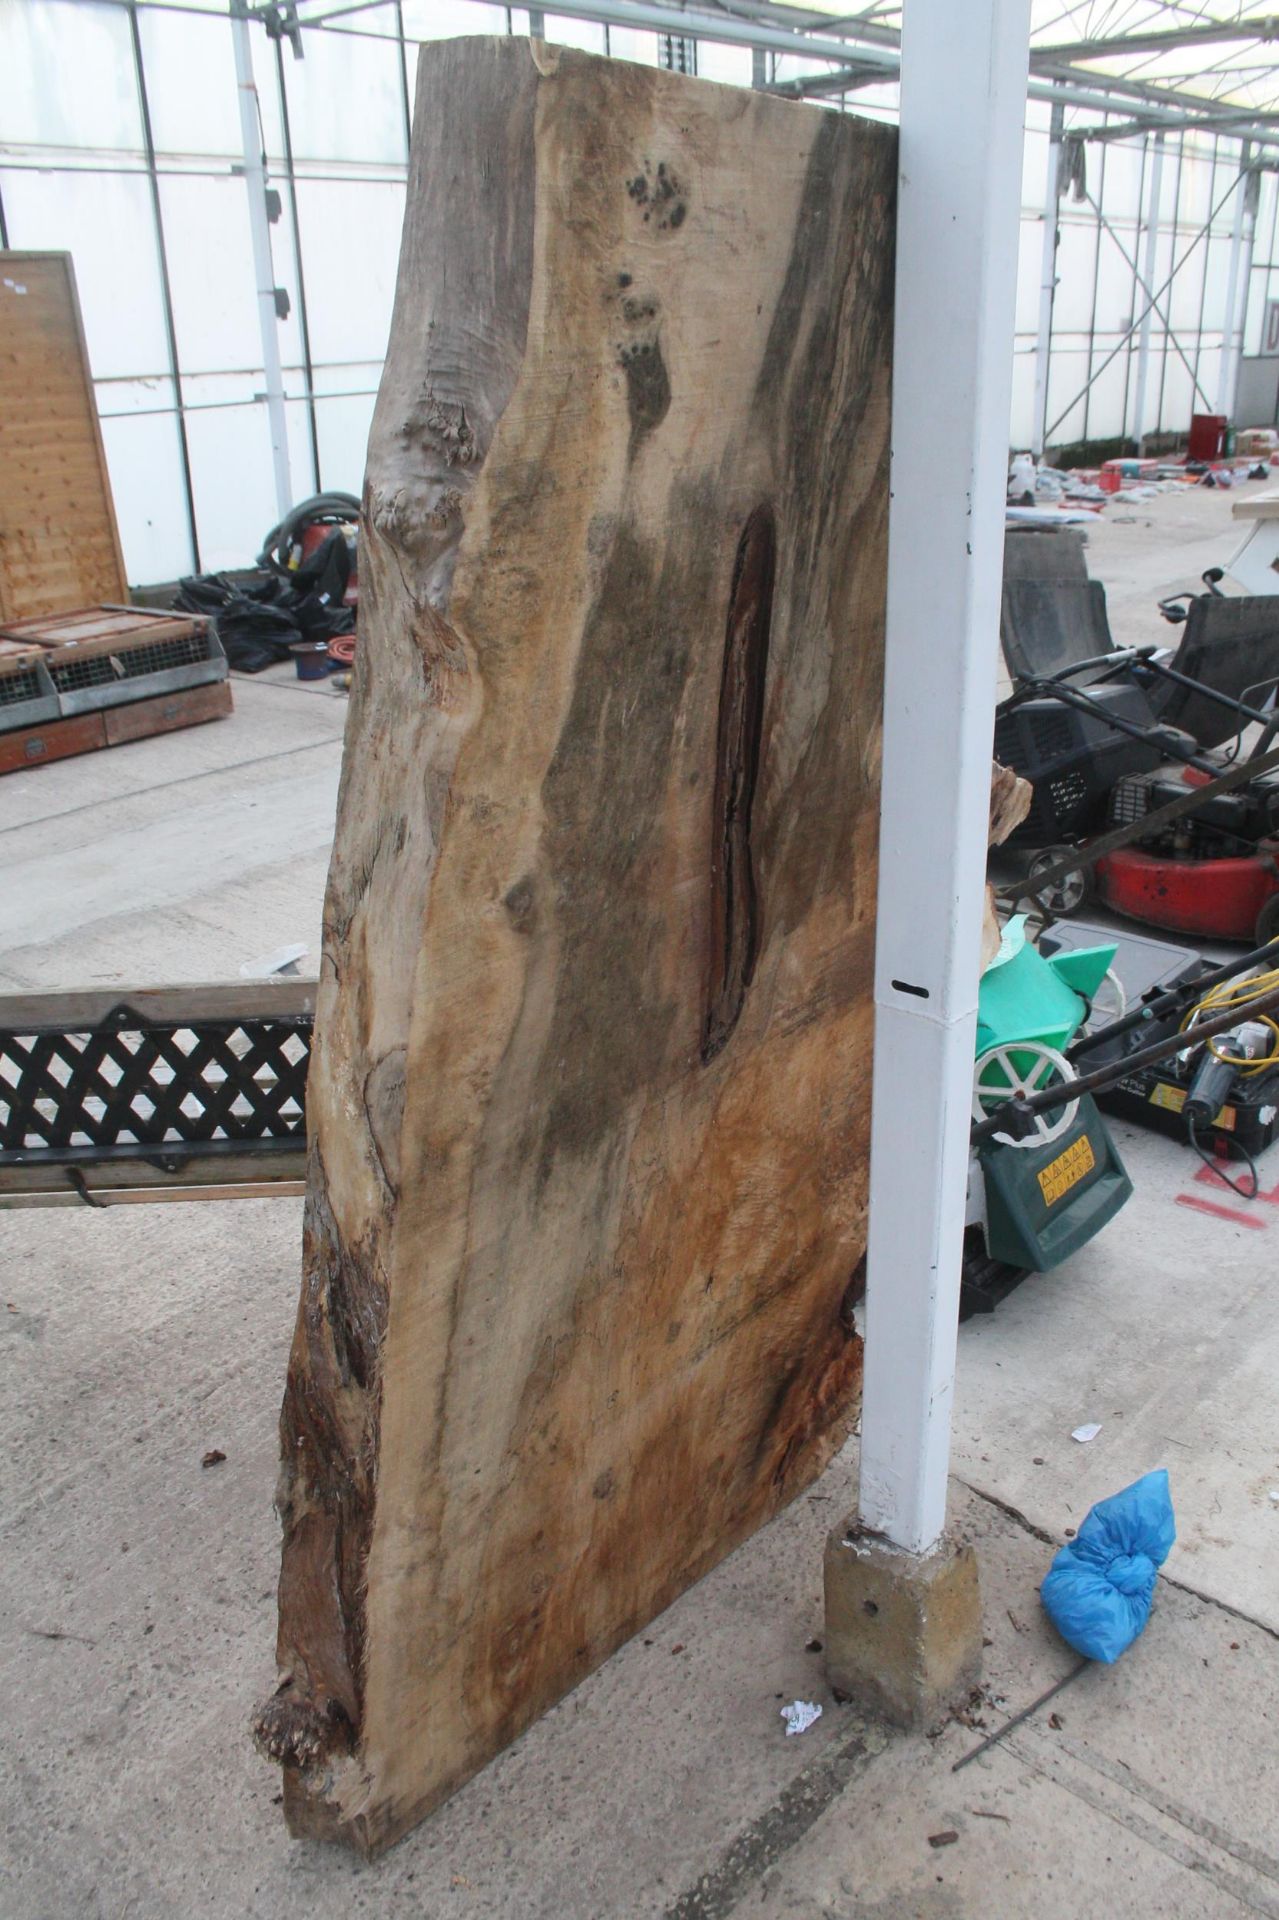 LG SLAB OF CEDAR 4" THICK 5 FT LONG APPROX. NO VAT - Image 2 of 2